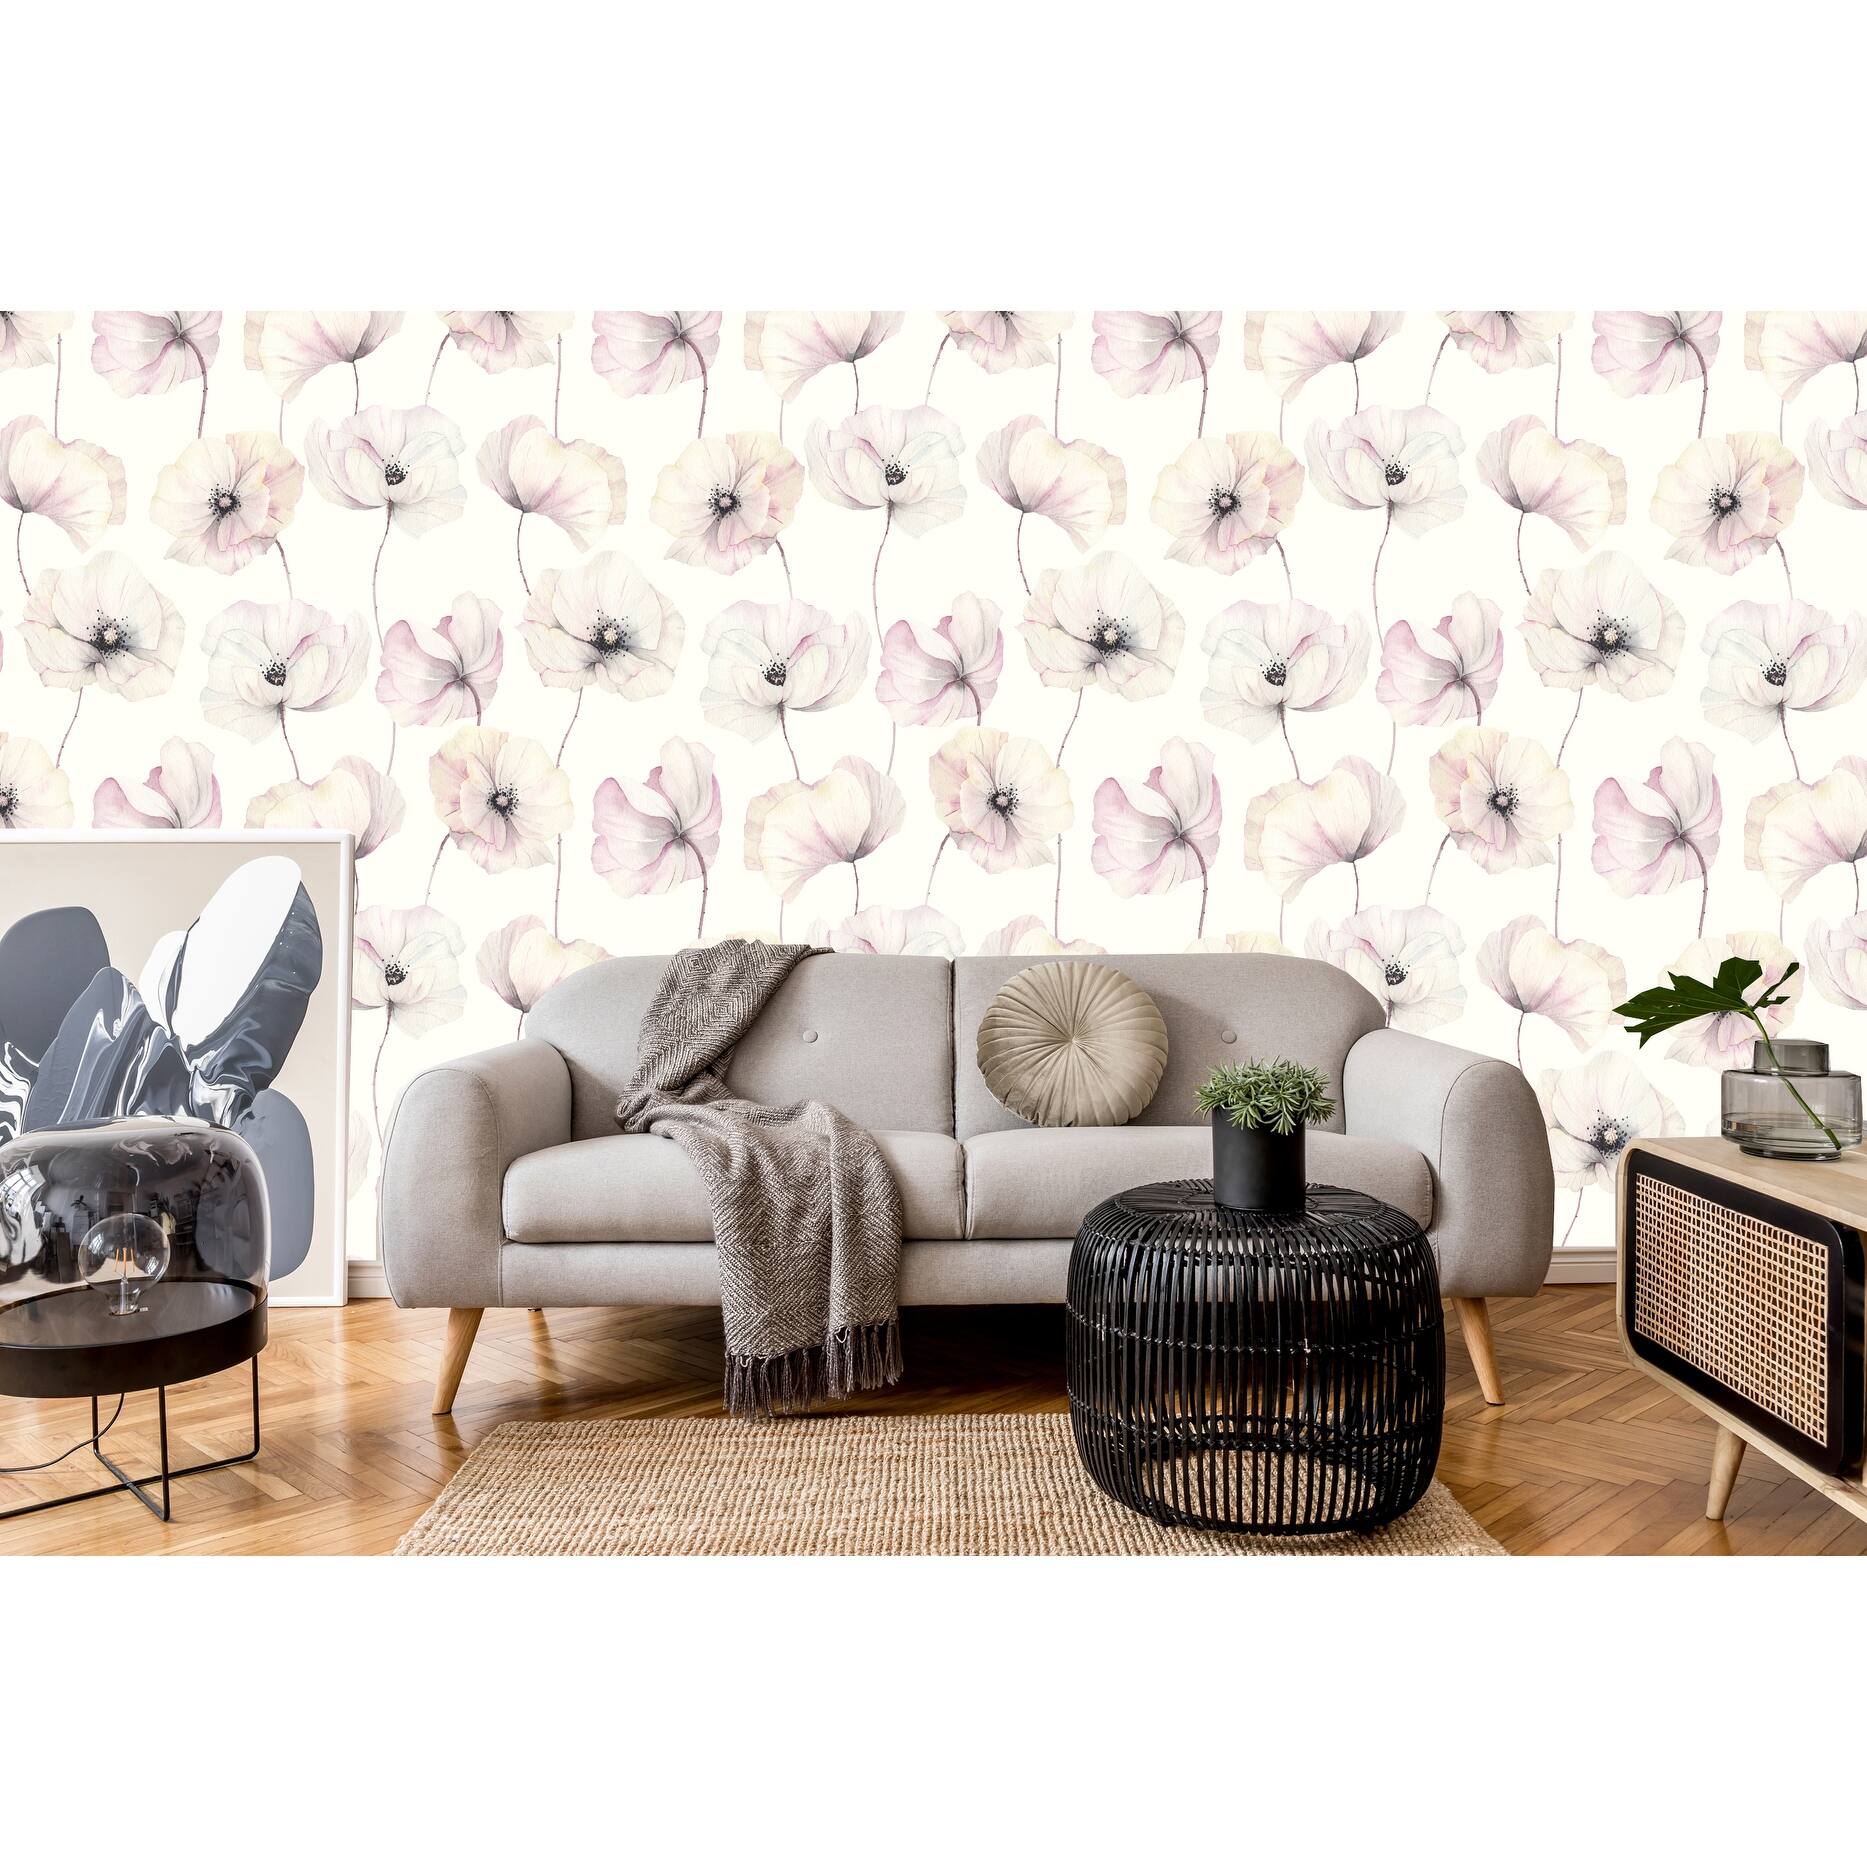 Panssy Flowers Removable Wallpaper - 24'' inch x 10'ft - Bed Bath ...